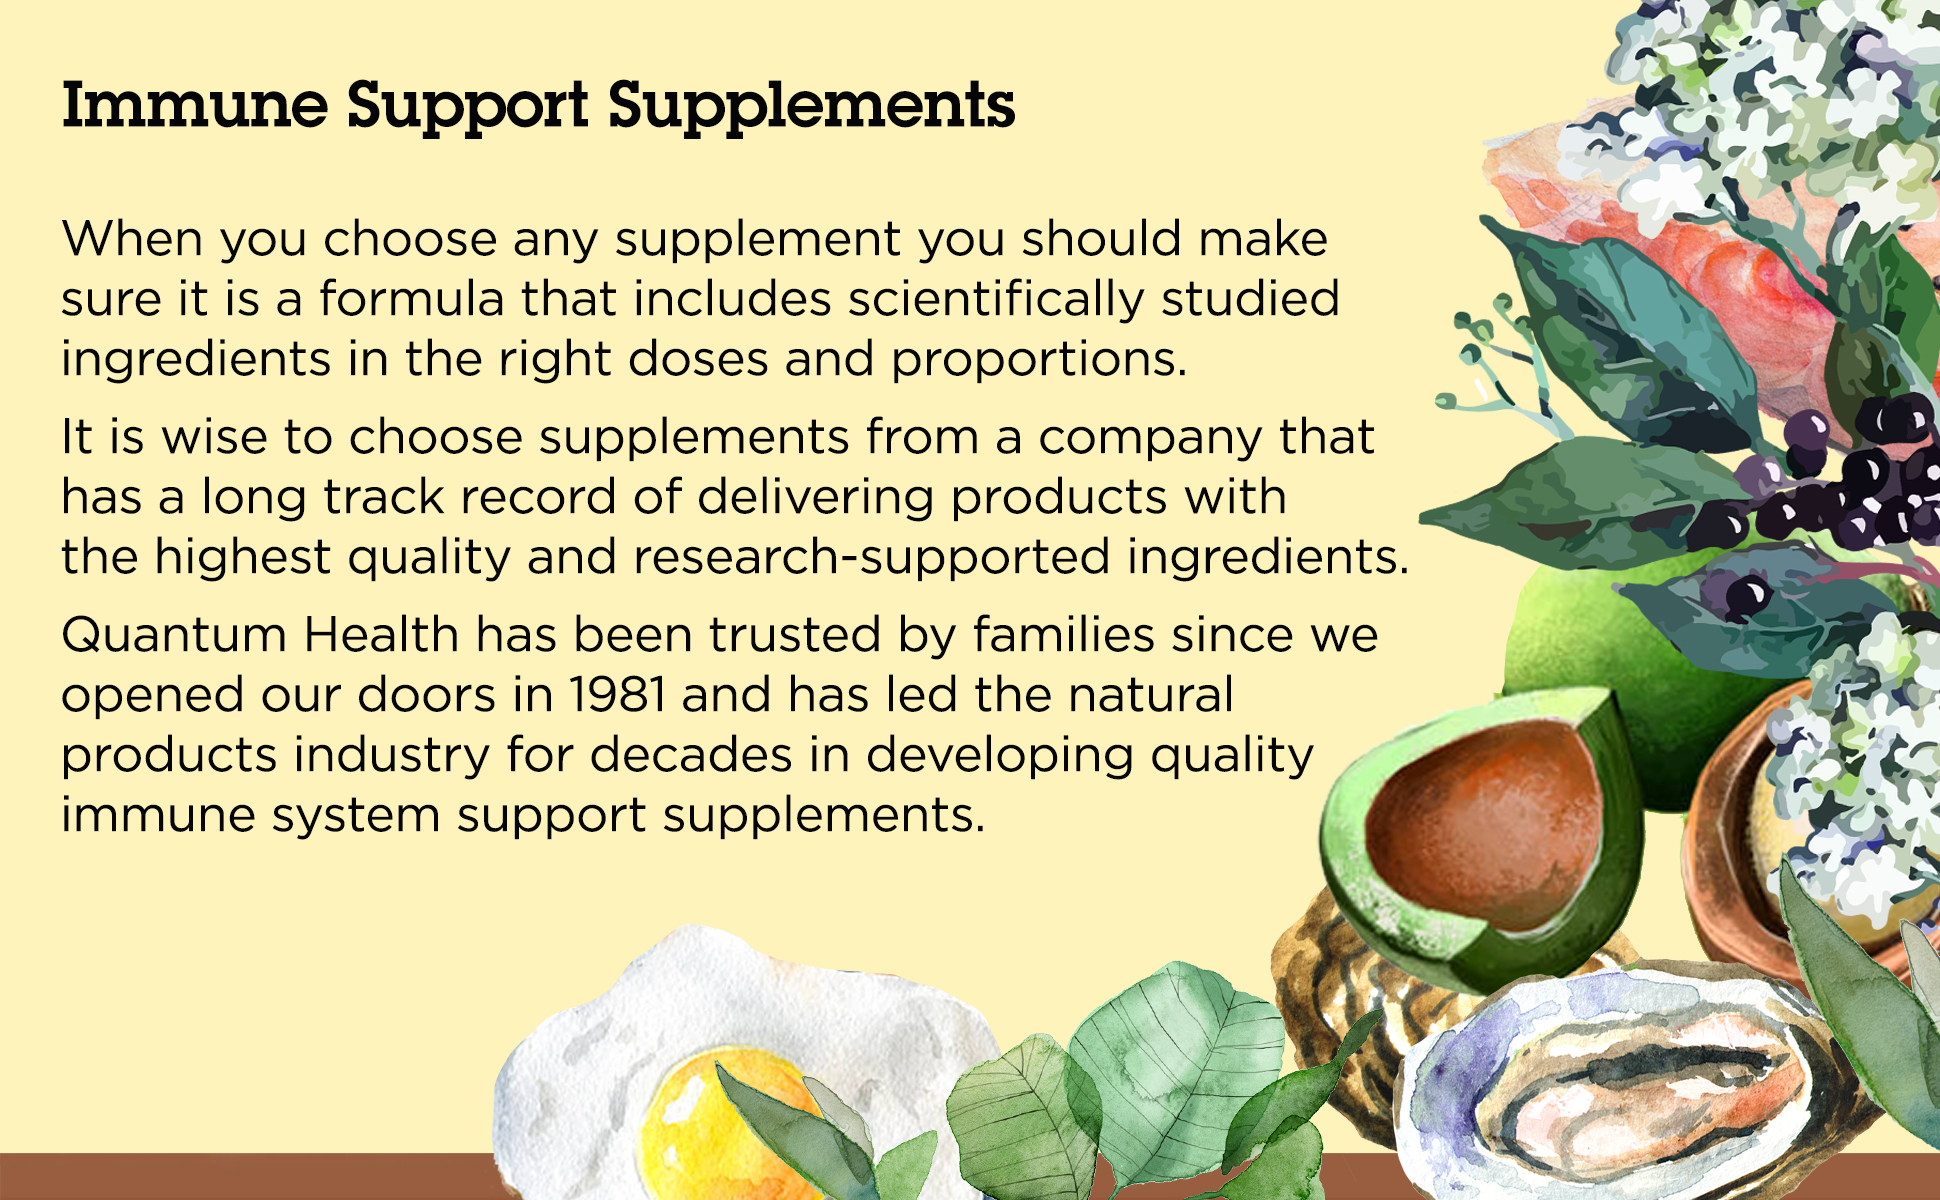 Guidance on how to choose an immune support supplement.